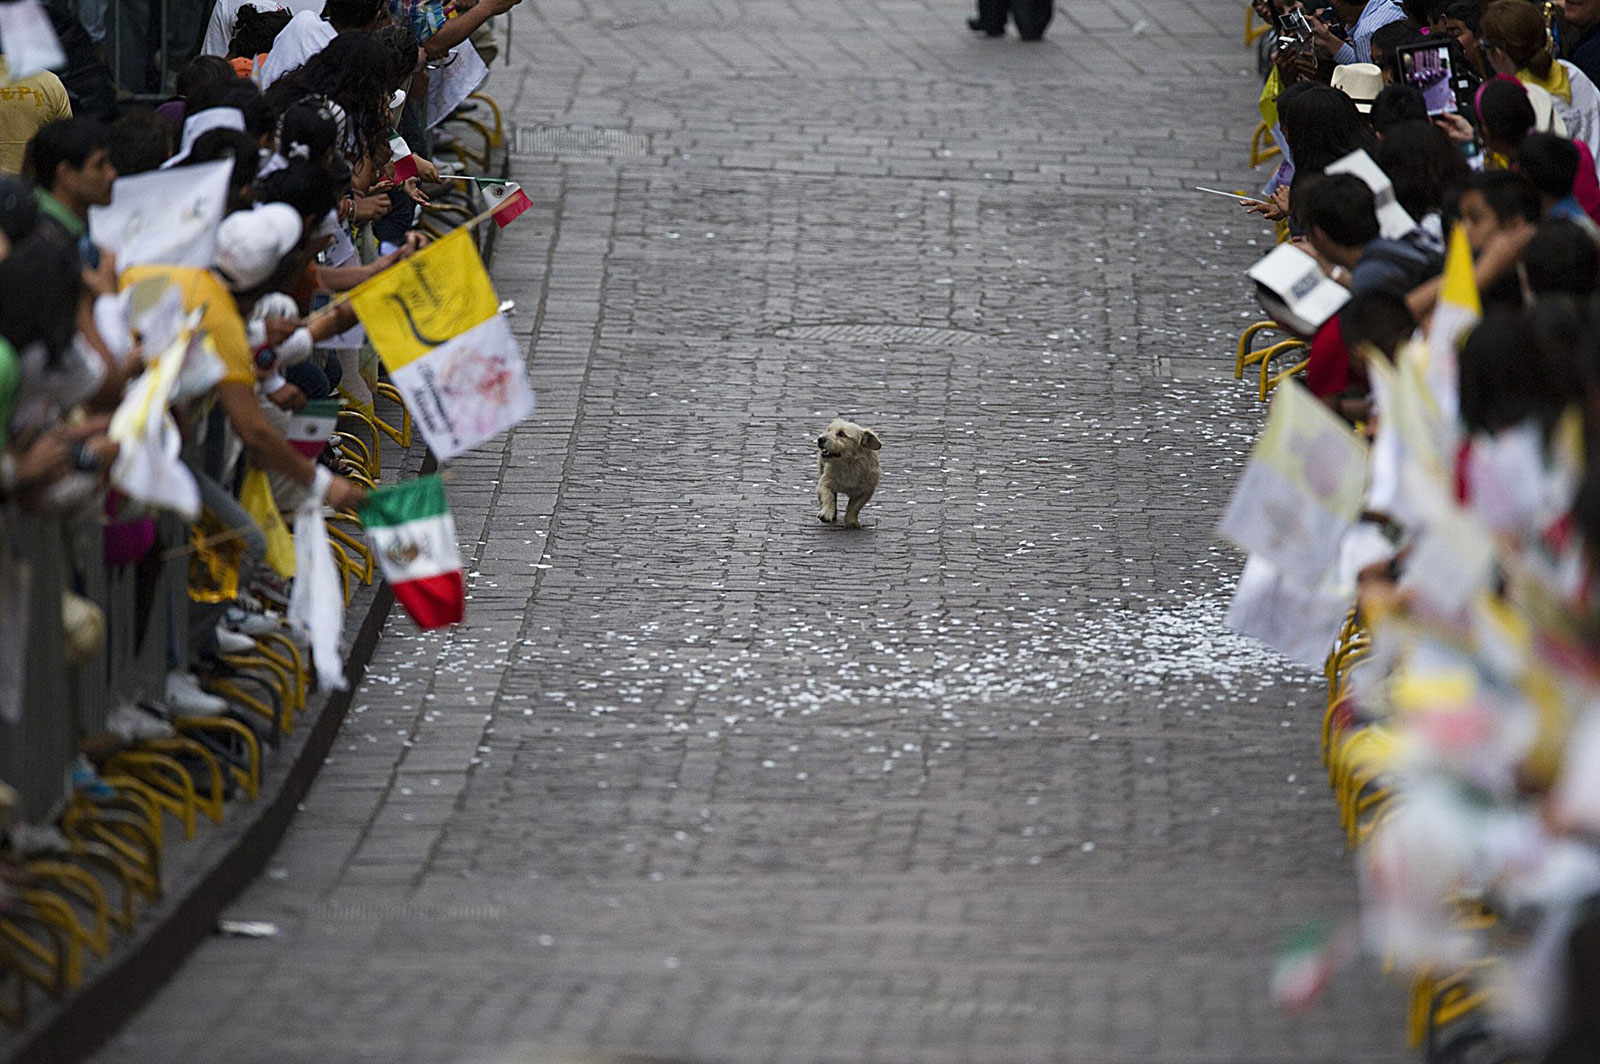 A dog soaks in an adoring crowd in Mexico by following the Pope. 2011